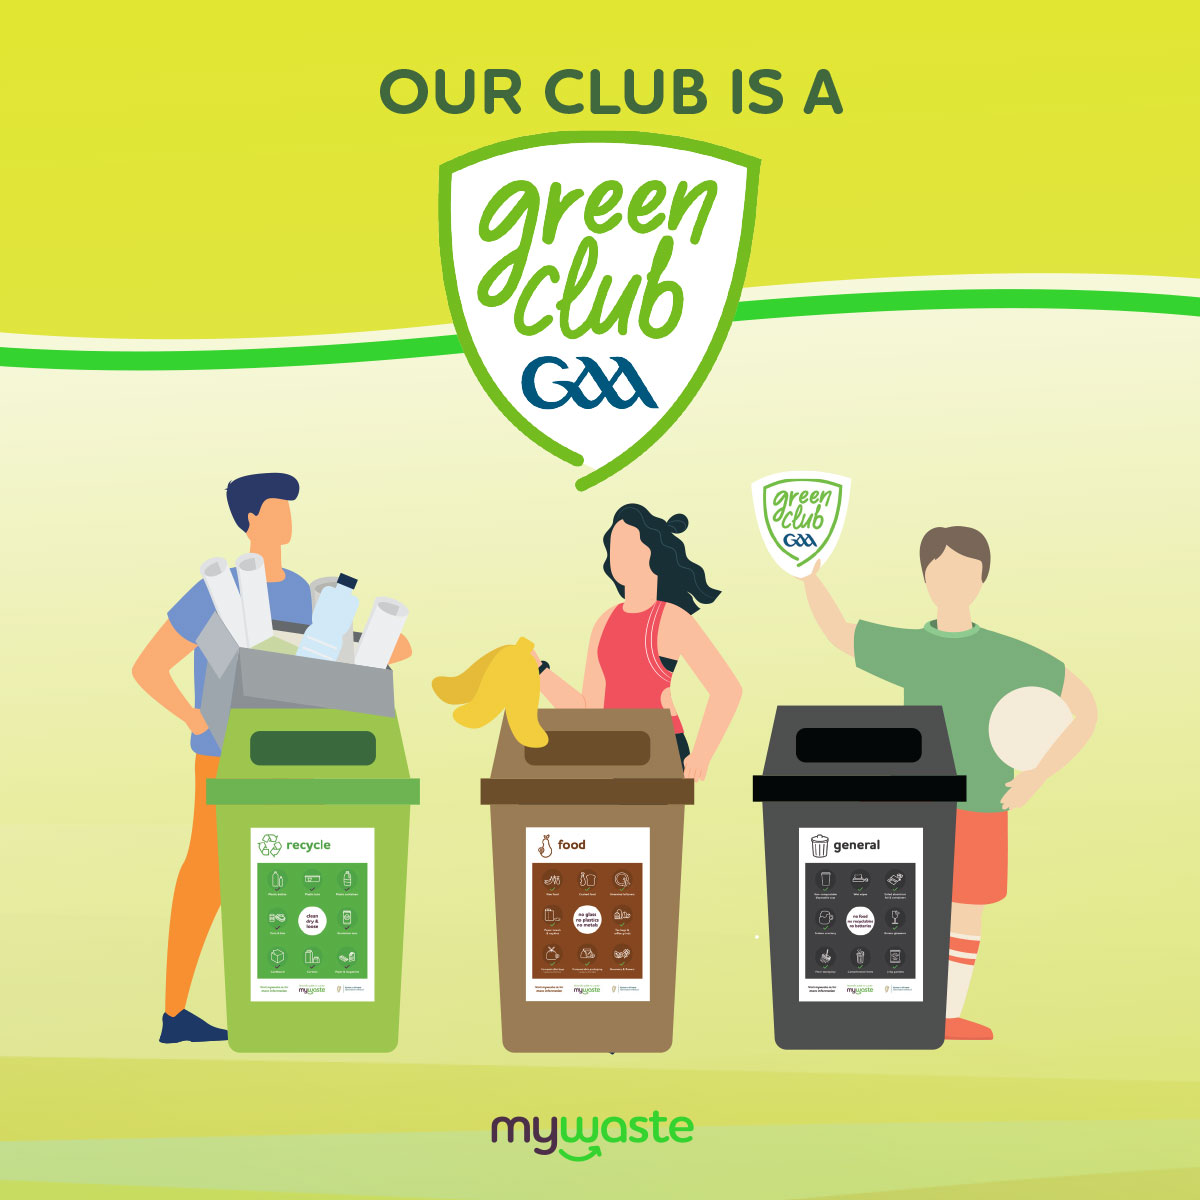 A key element of our new #gaagreenclub initiative is waste separation. 
New bins have been placed around the Club, labelled RECYCLE, GENERAL or FOOD. Please check the bins for  details of what can be put in – every member and visitor will play their part!
#mywaste #gaabelong